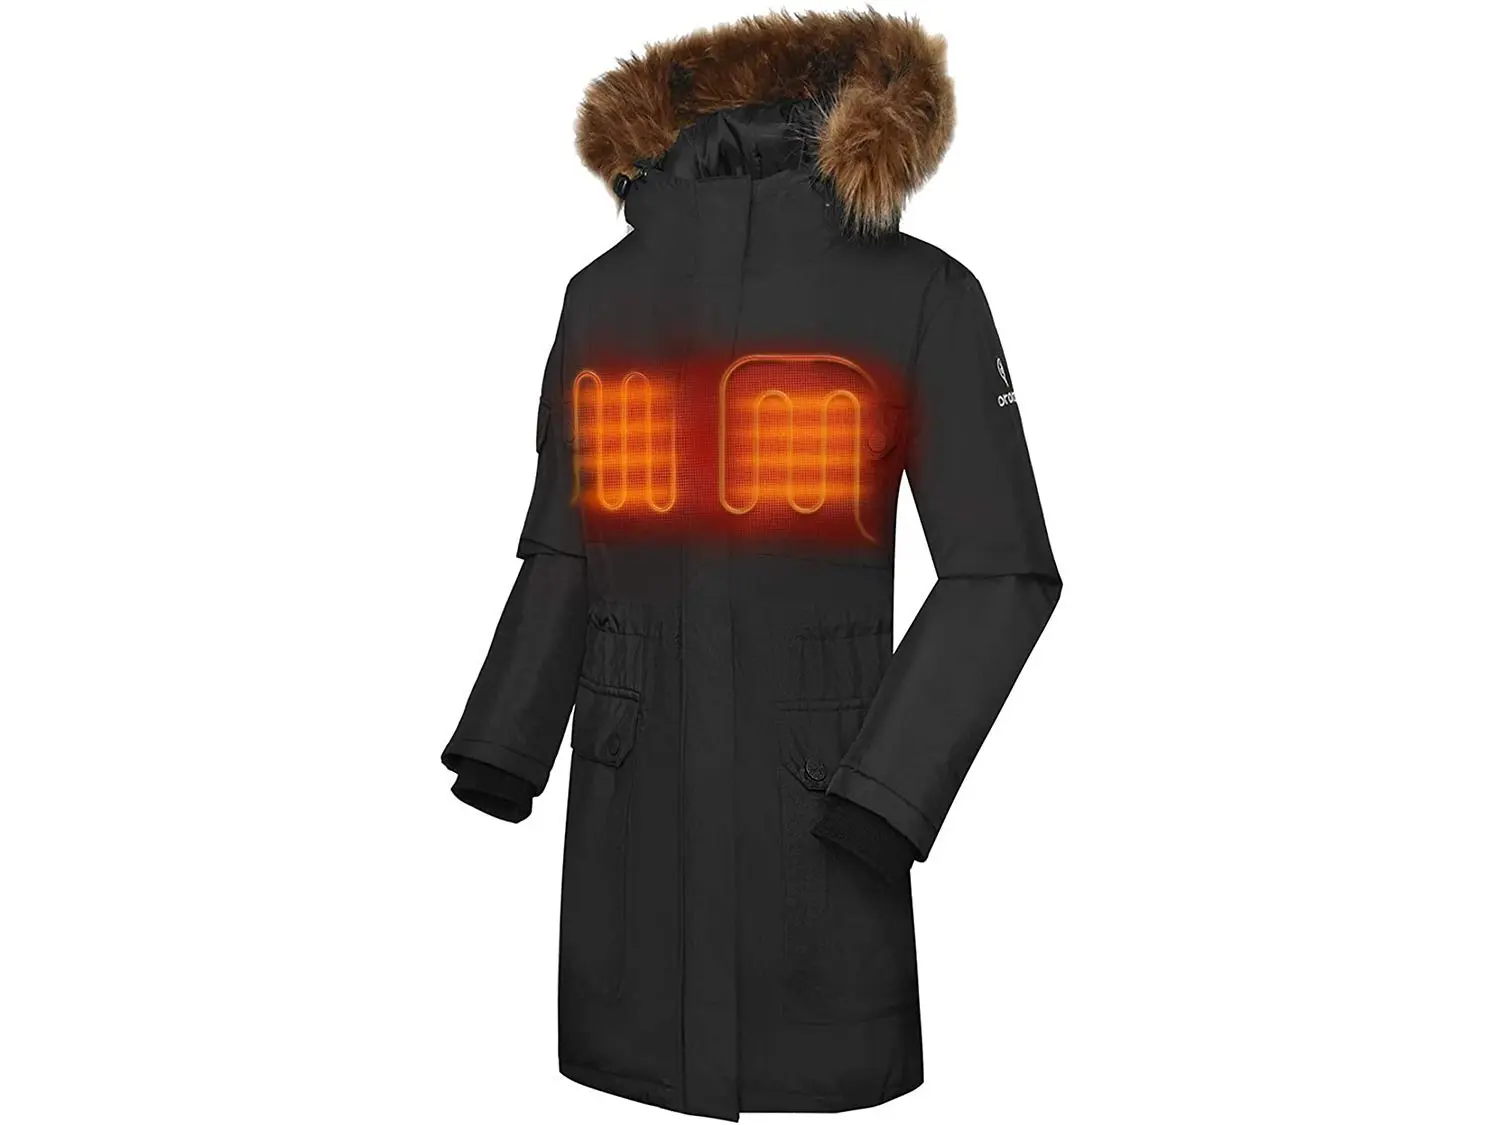 Ororo Women's Heated Parka Jacket with Thermolite Insulation